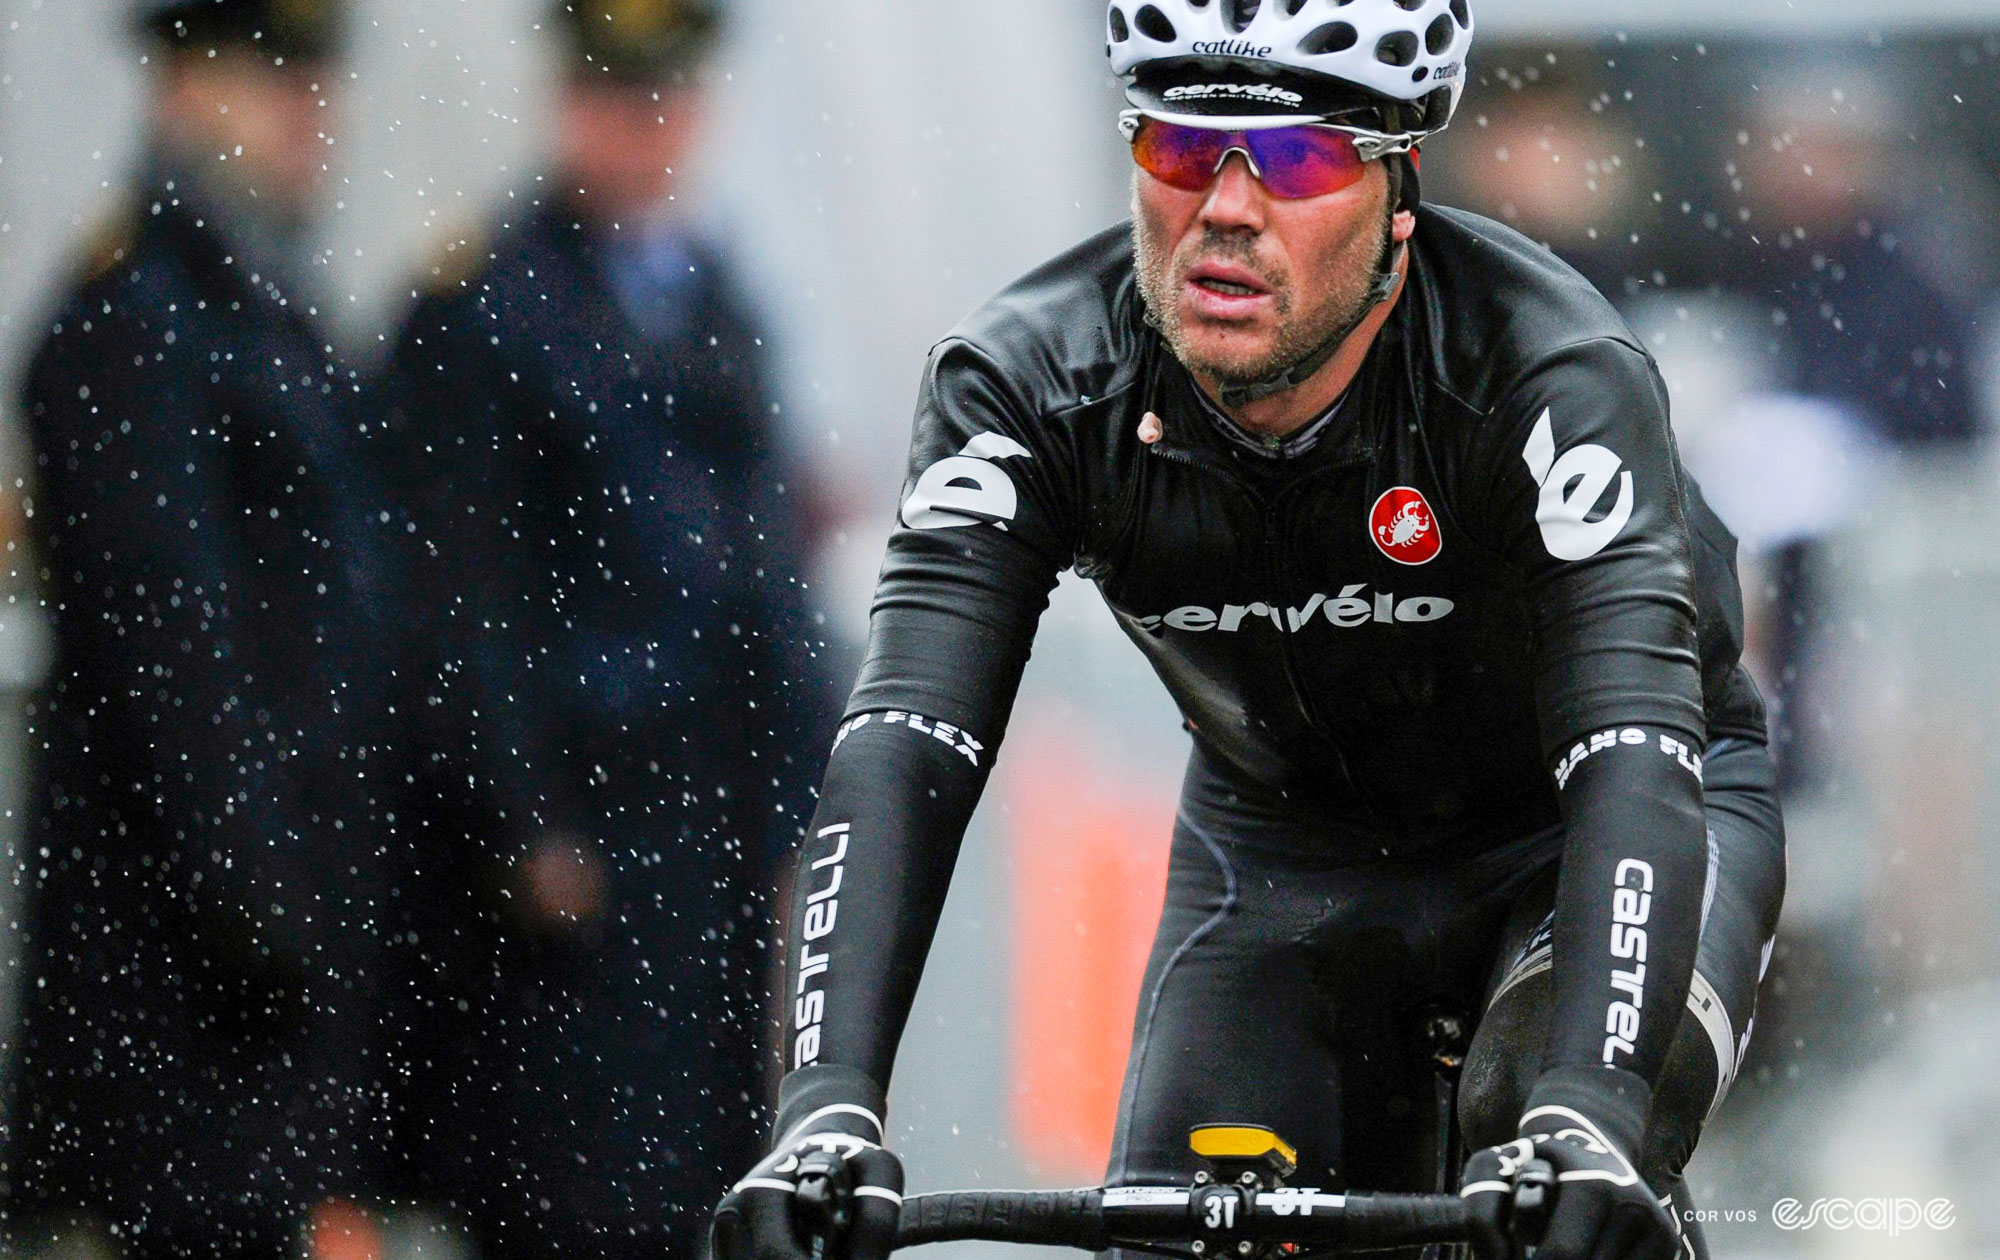 The photo shows Thor Hushovd in the original Gabba at Kuurne Brussels Kuurne 2010.